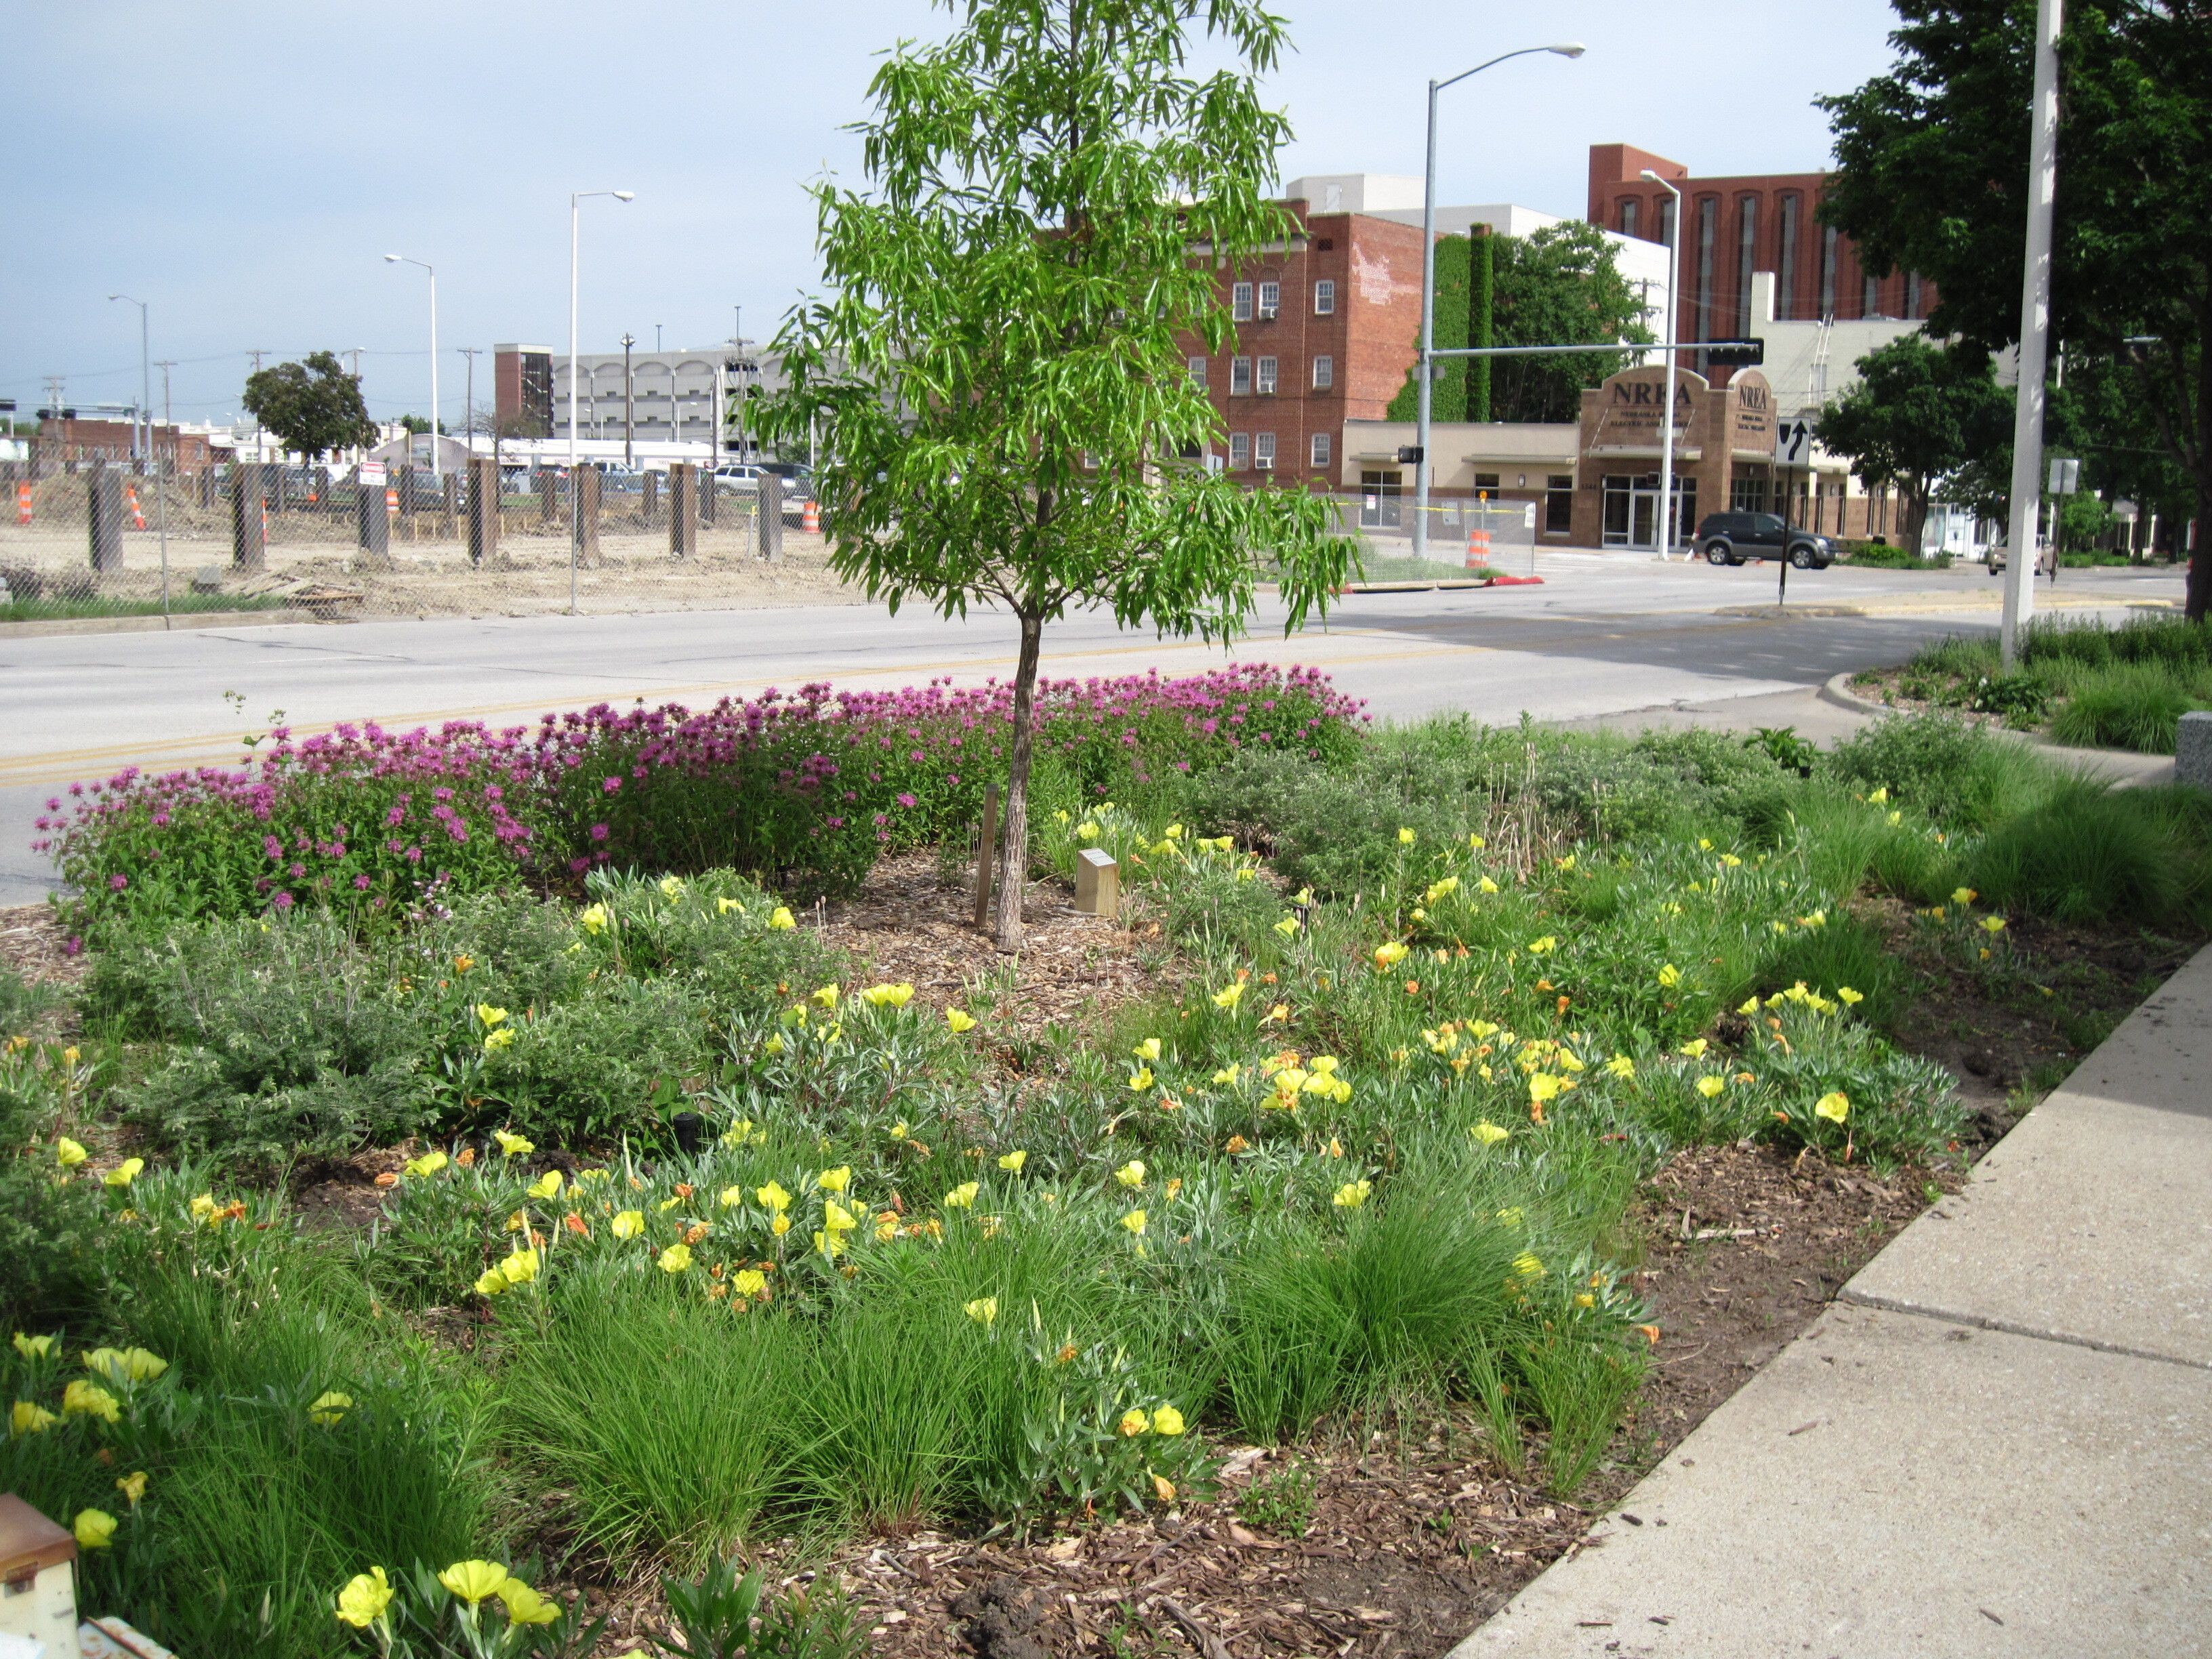 Green infrastructure such as perennials and tree plantings help mitigate urban heat island effect. 